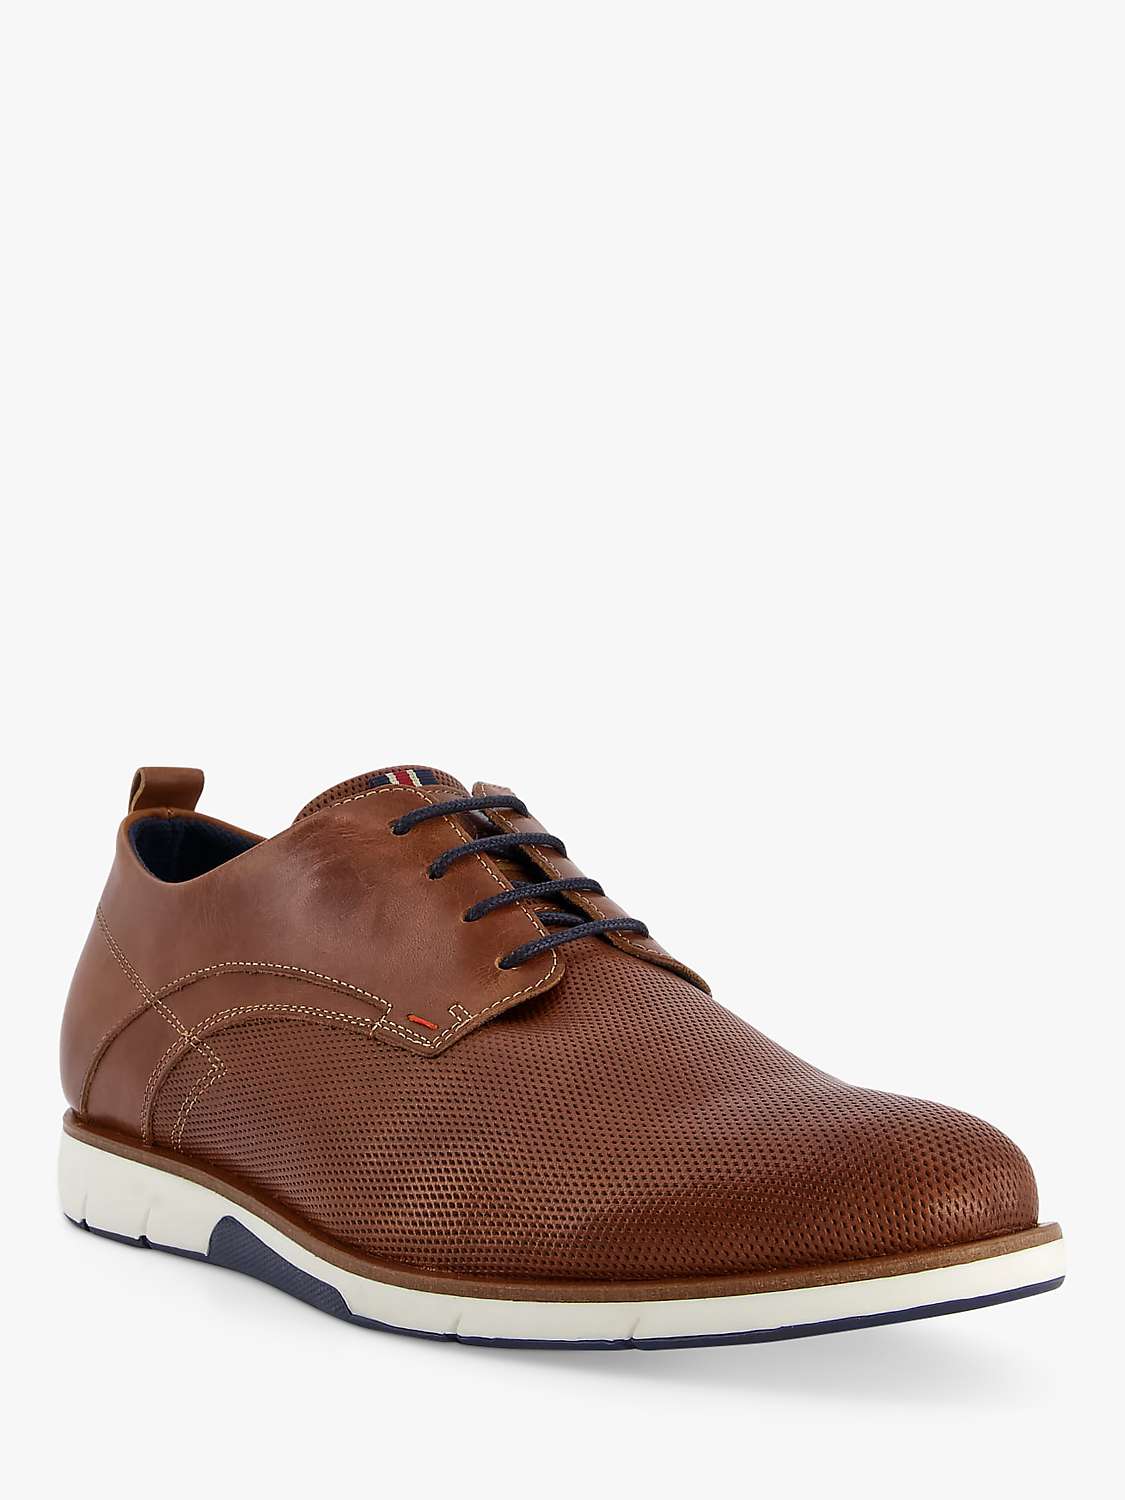 Dune Balad Wide Fit Punch Hole Casual Shoes, Tan at John Lewis & Partners